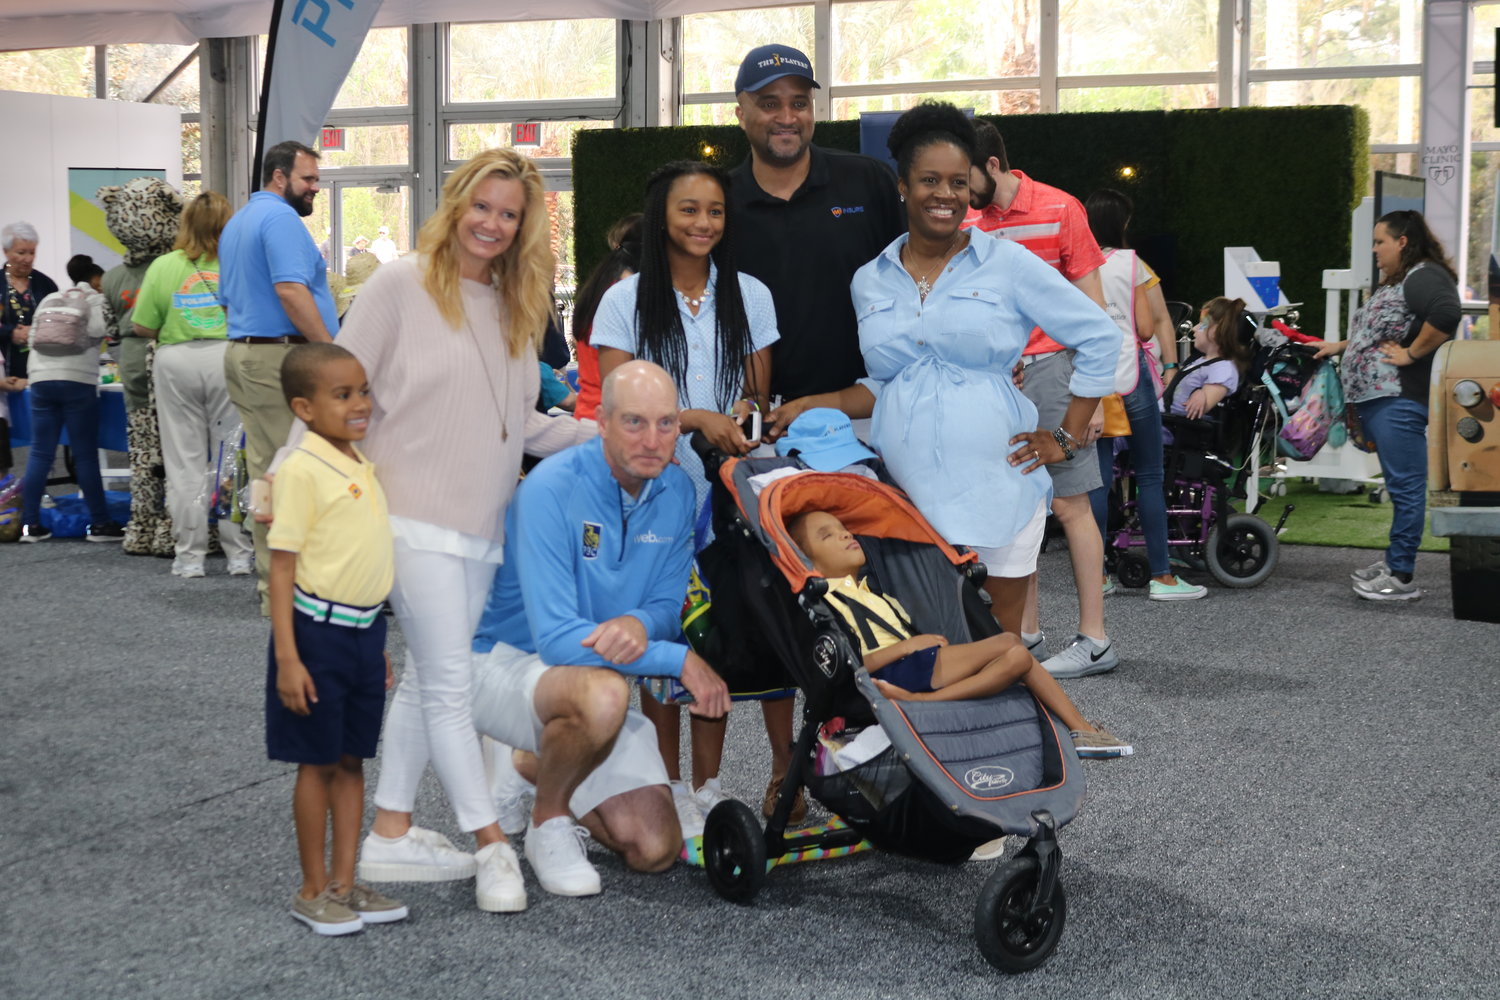 Tabitha and Jim Furyk gather with a family at “These Kids Can Safari” at THE PLAYERS on March 12.